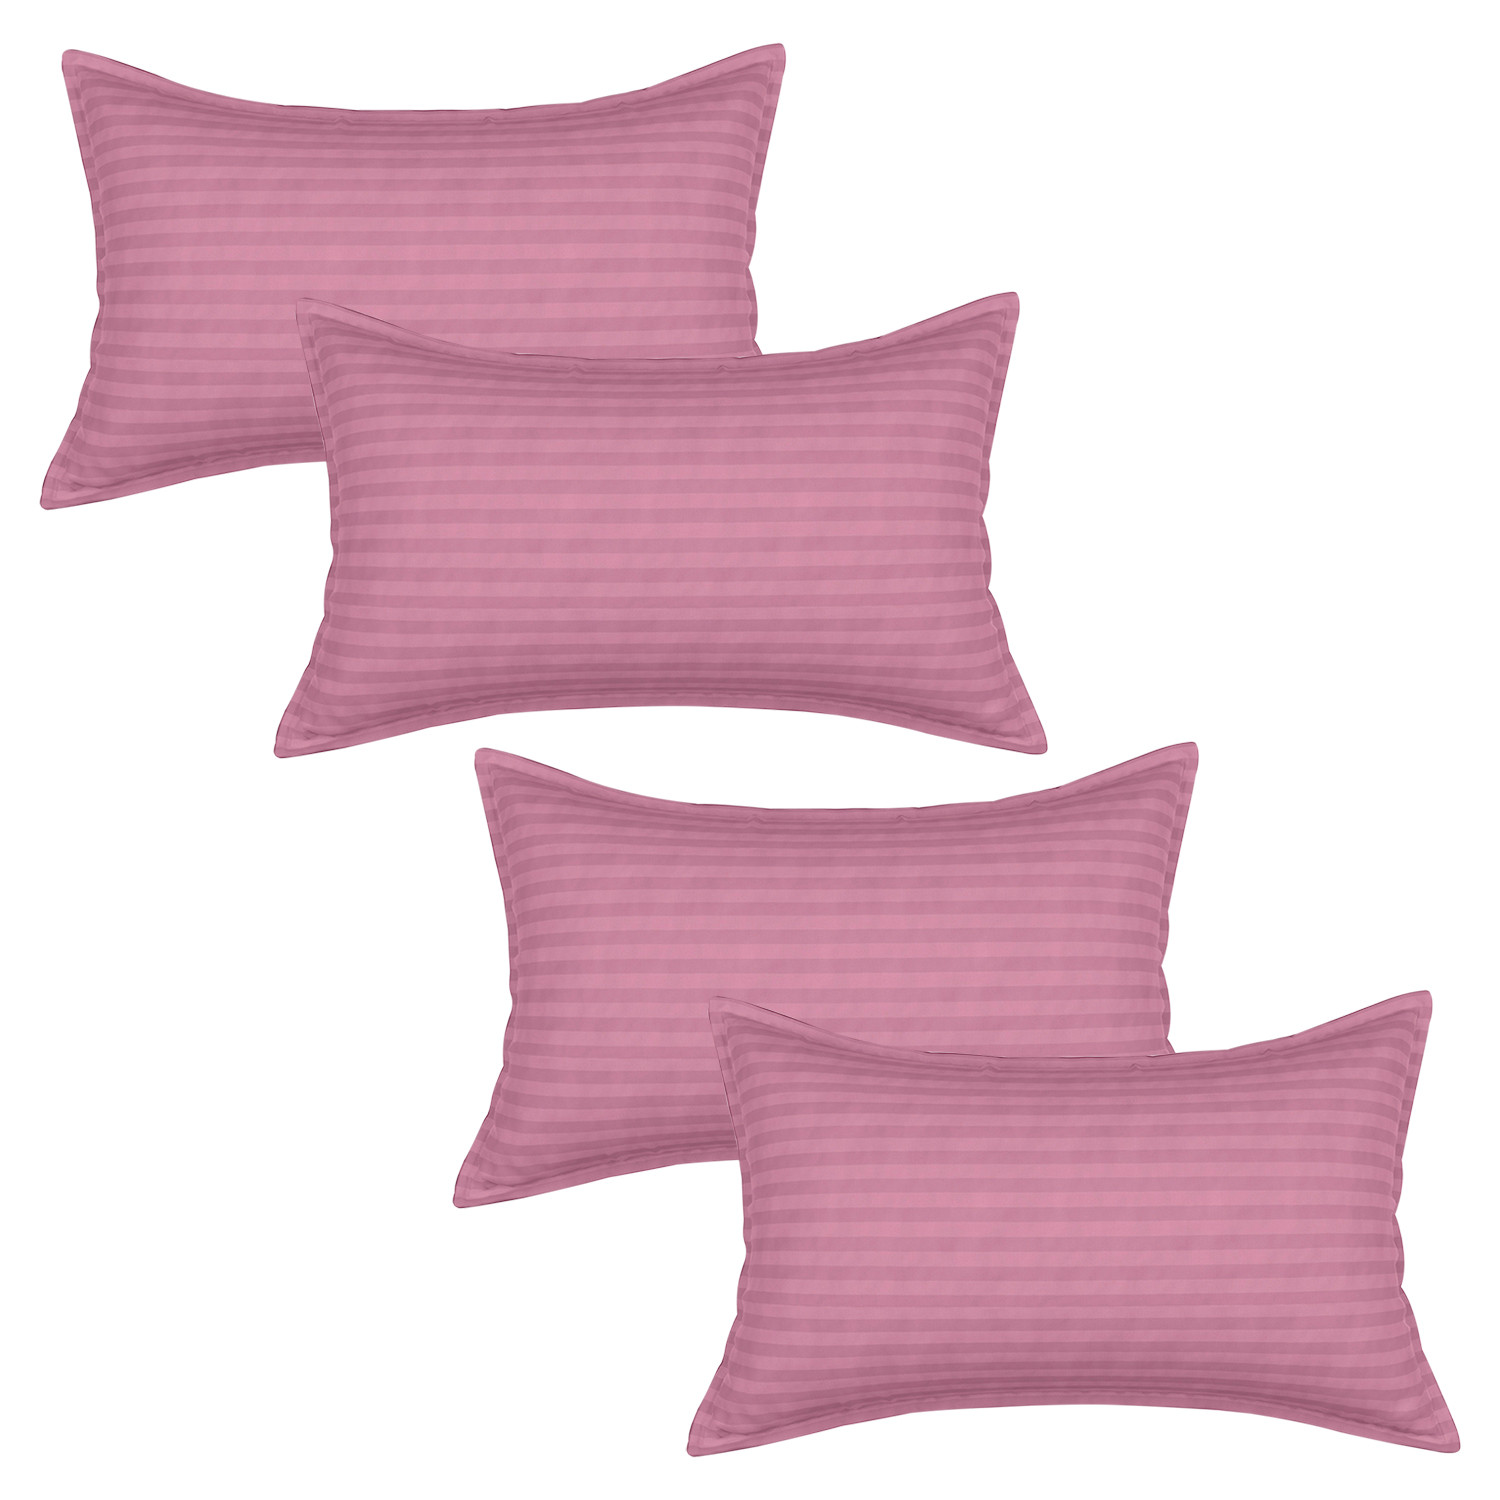 Kuber Industries Pillow Cover | Cotton Pillow Cover | Striped Pattern Pillow Cover | Soft Pillow Cover for Home | Pillow Cover for Bedroom | Pink